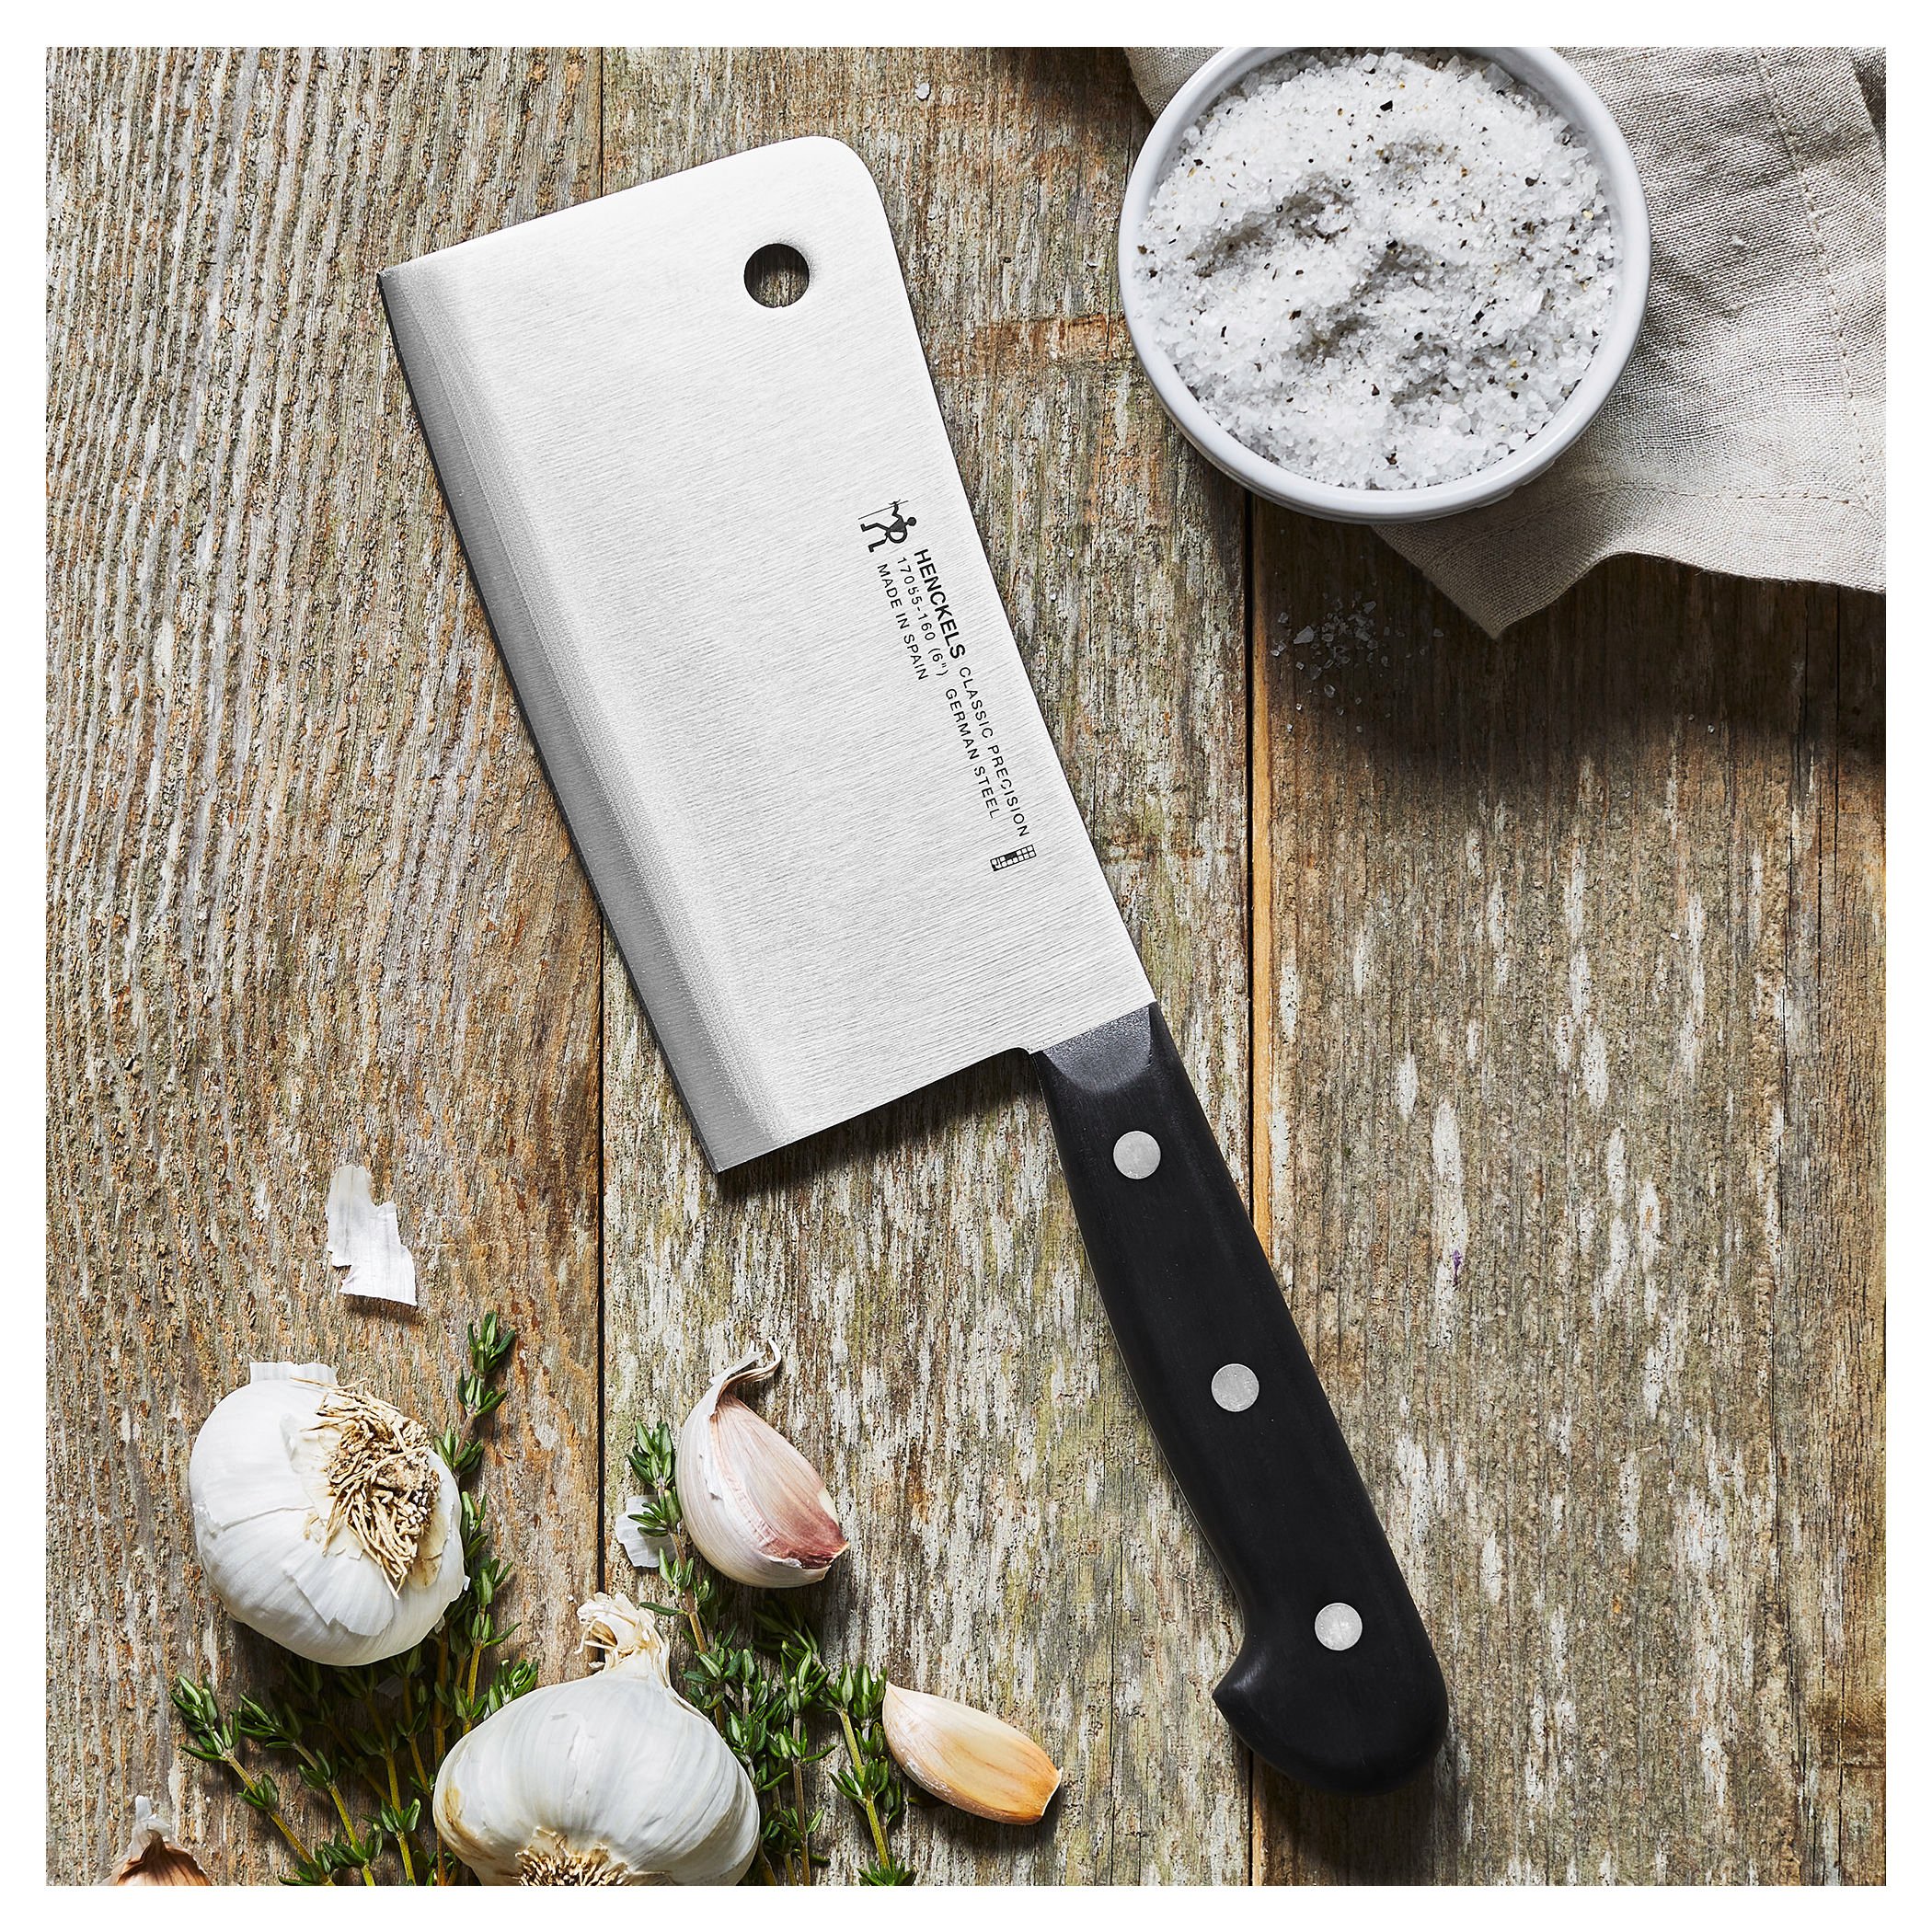 Henckels Forged Premio 6-inch Meat Cleaver, 6-inch - Food 4 Less